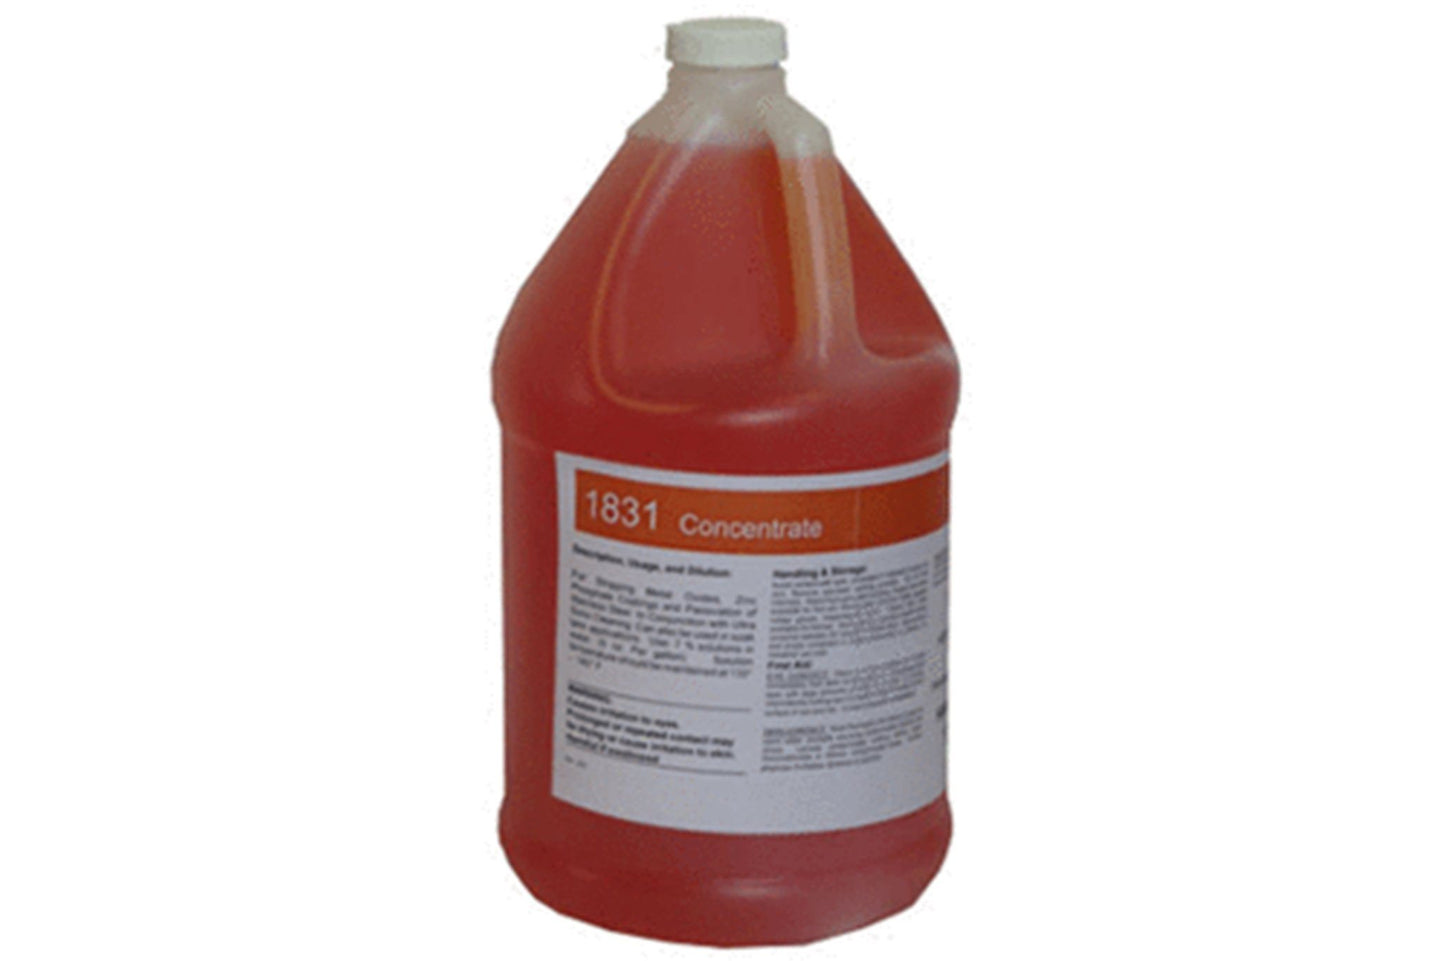 SharperTek Cleaning Solution SC31-1831 | Remove Grime, Scale, and Oxide Metals - leadsonics